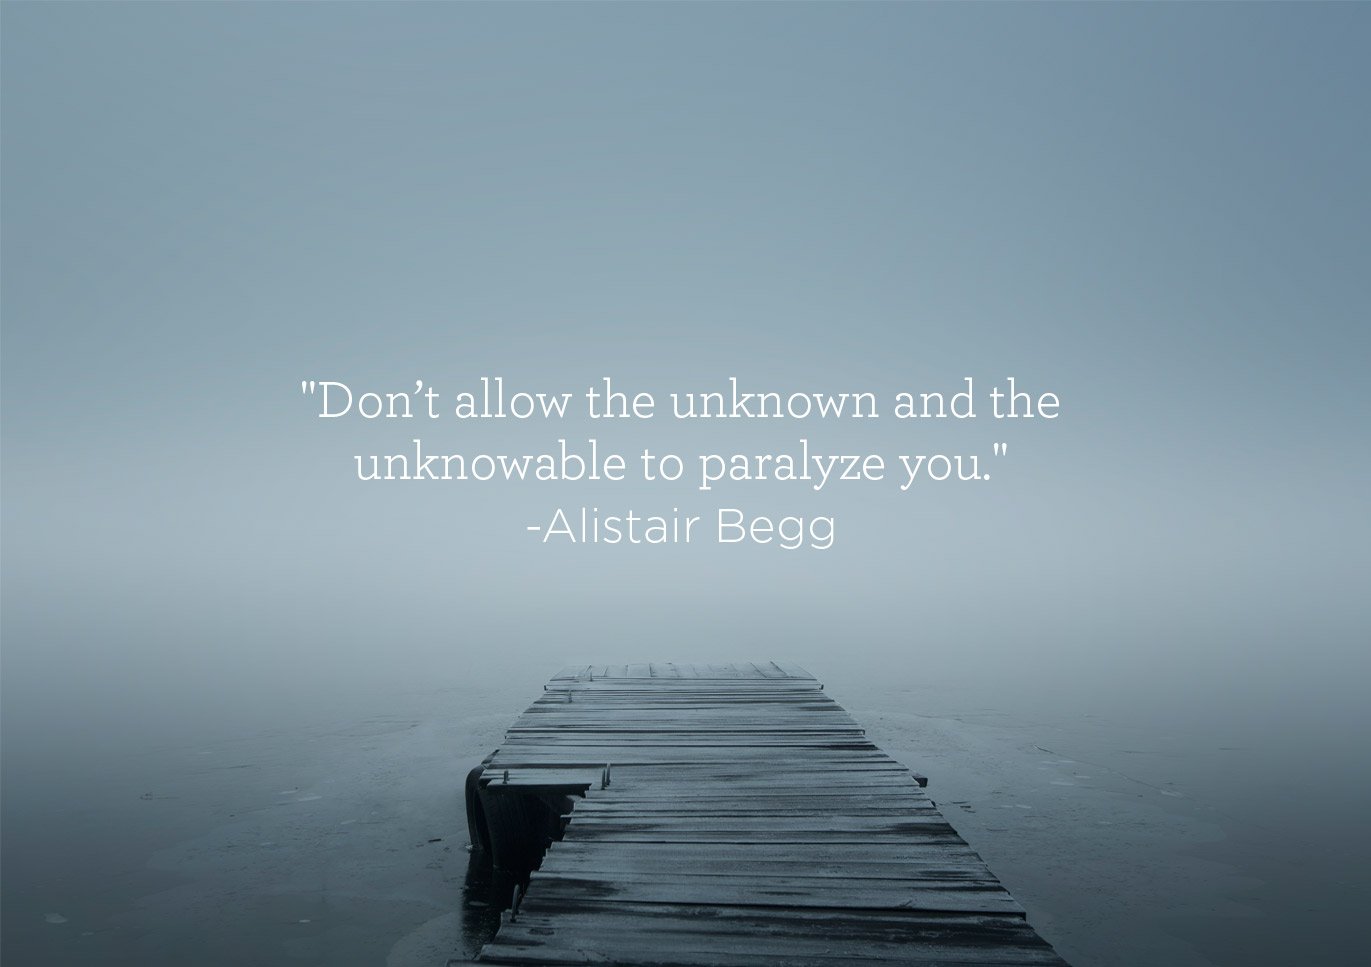 investing in the unknown and unknowable